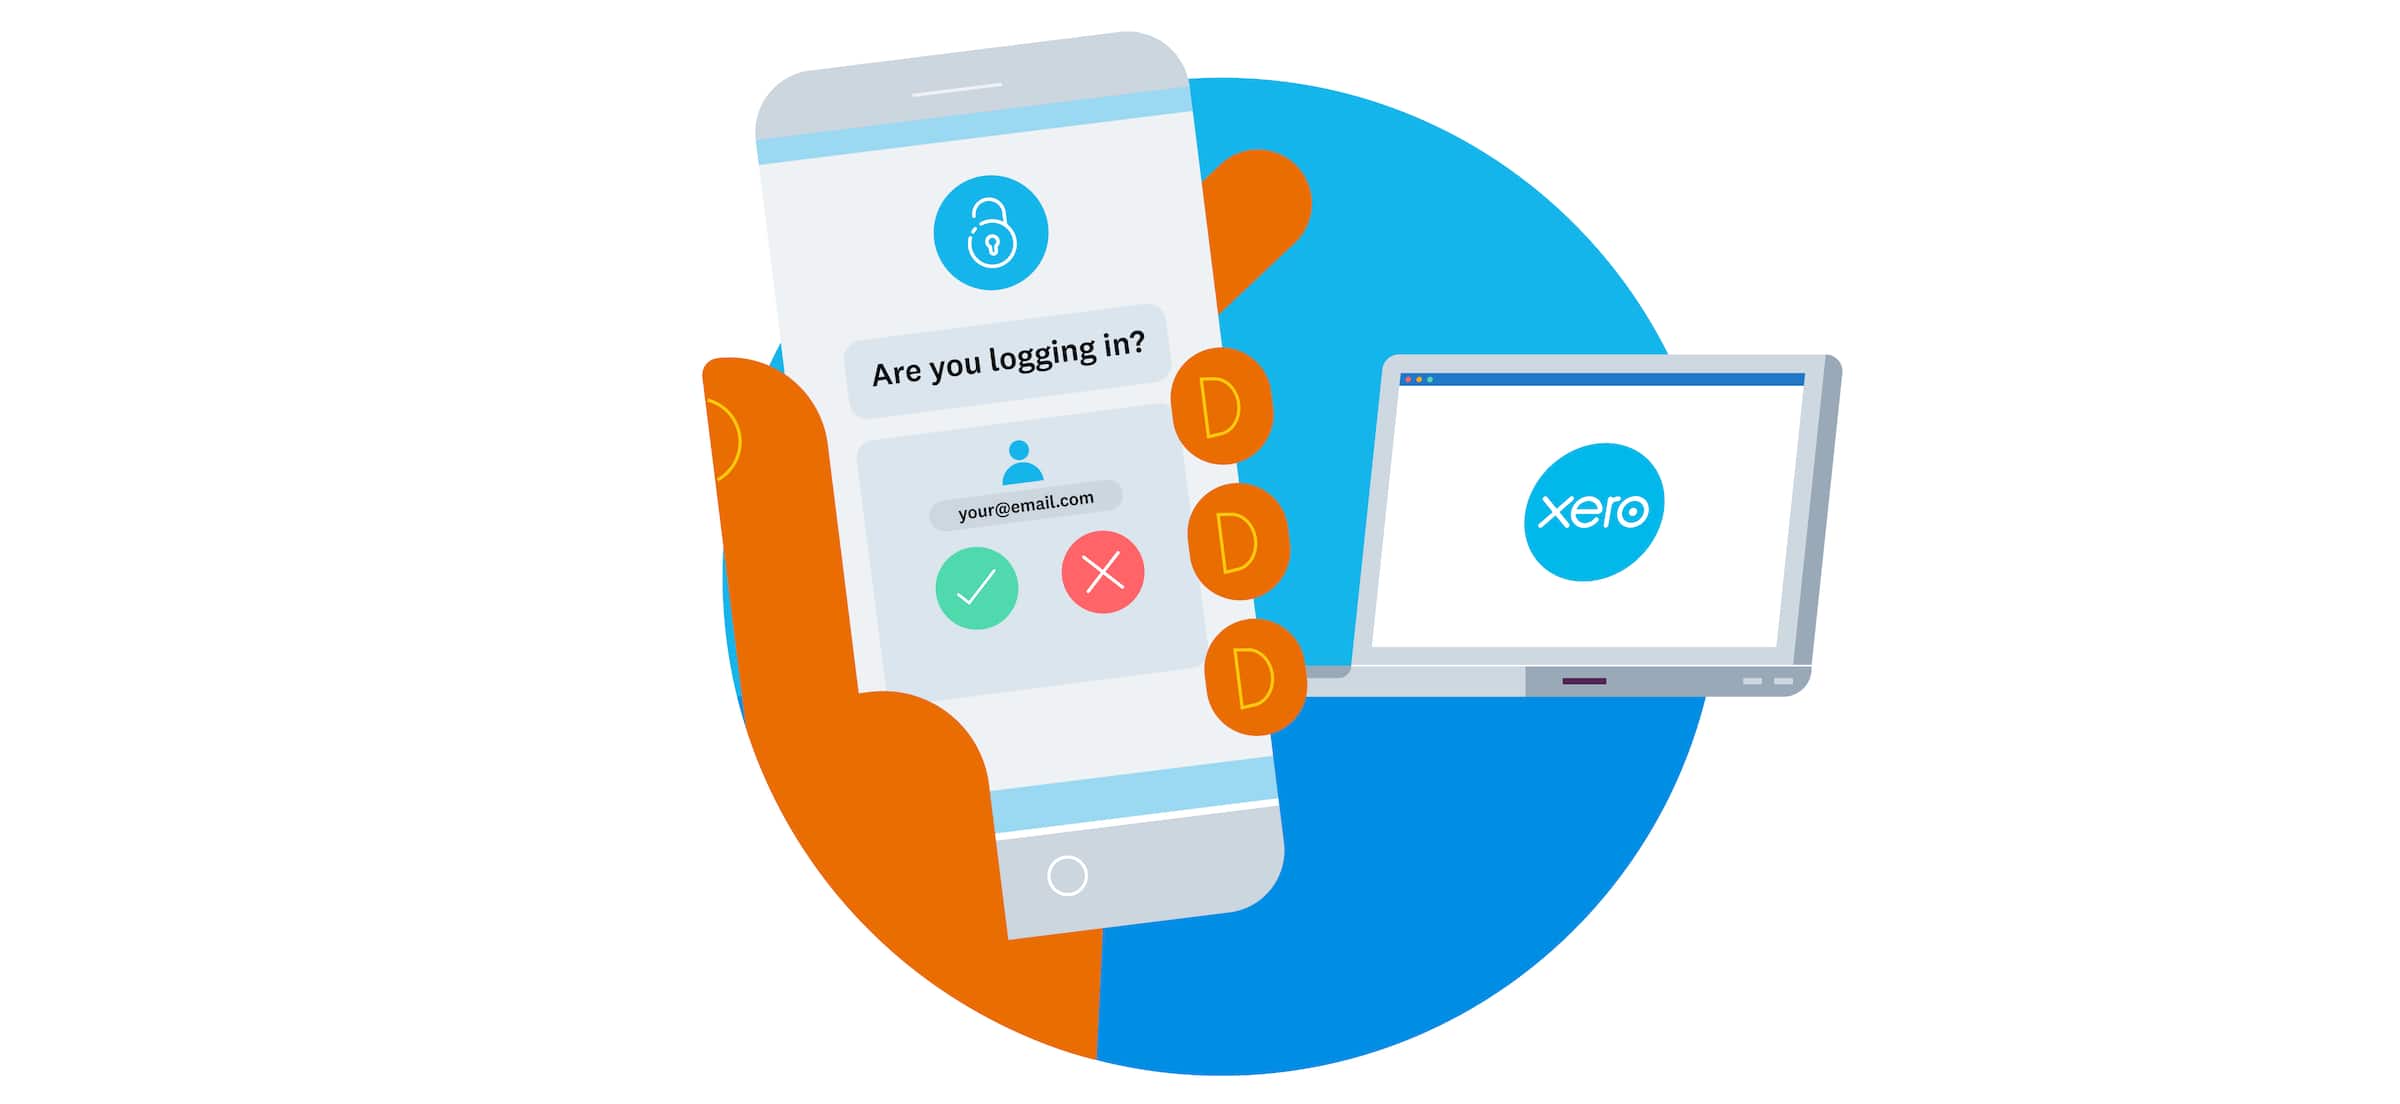 A xero user receives a message on their phone checking it’s really them logging